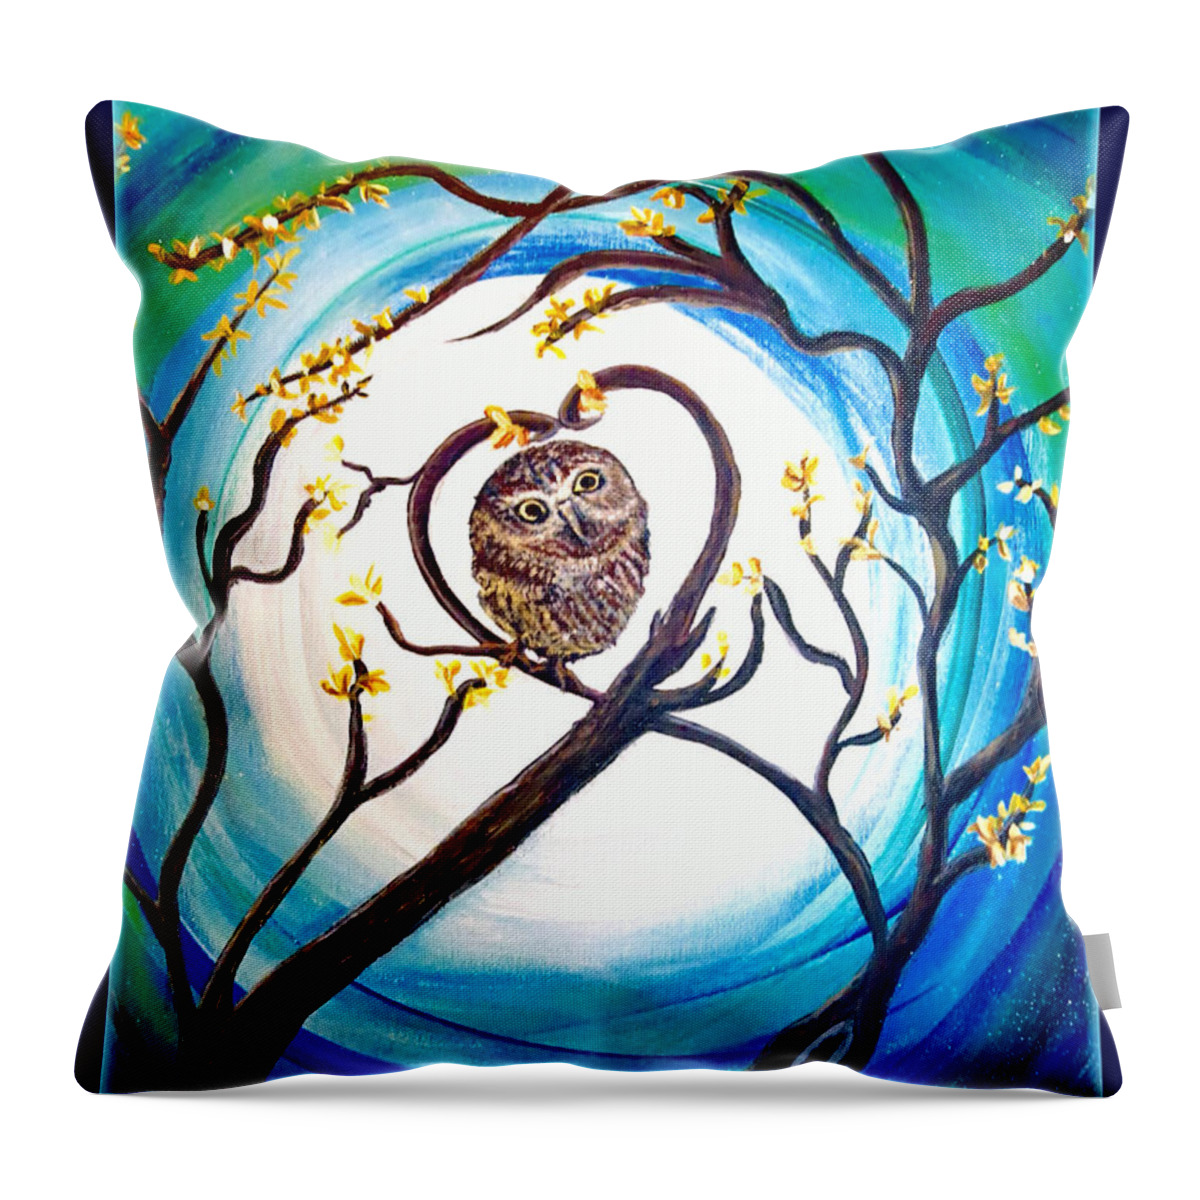 Bright Swirling Pattern Of Light Around The Moon Throw Pillow featuring the painting By the Light of the Moon I Will Find You by Kimberlee Baxter